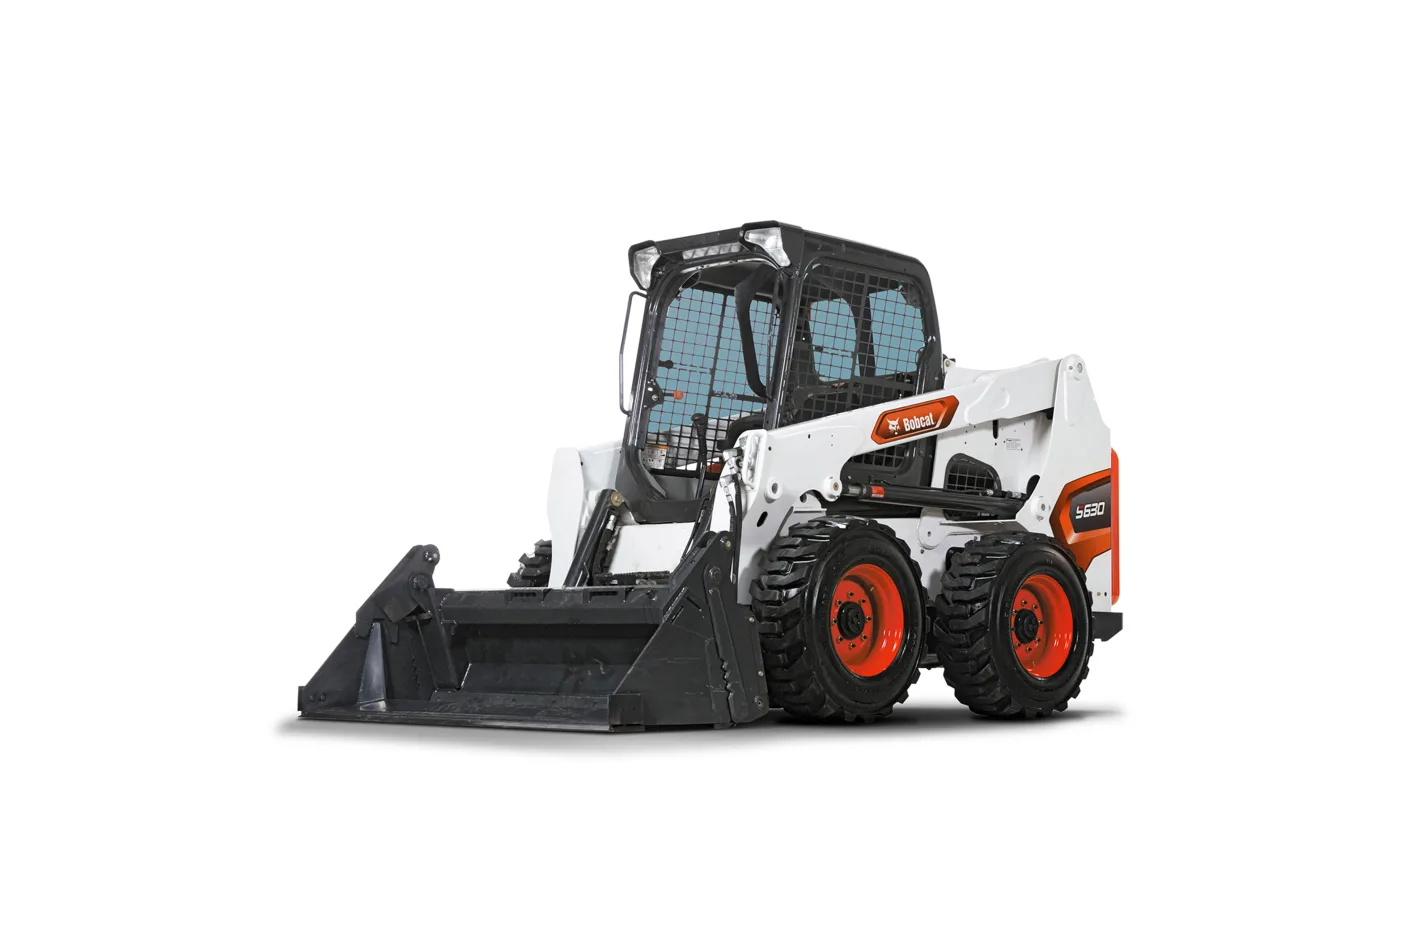 Browse Specs and more for the S630 Skid-Steer Loader - Bobcat of the Rockies